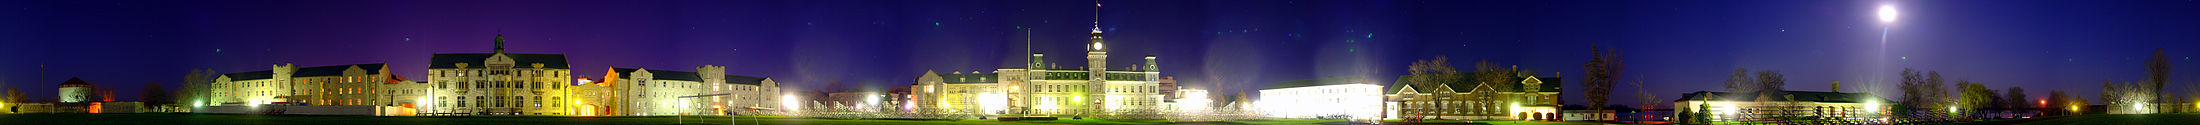 A 260 degree photo of the Royal Military College of Canada in  Kingston, Ontario, on the 4th of May 2007.  Seen is a green landscape during the night, featuring  buildings made of white stone and red brick. The night sky is  dark blue and purple, with the moon shining bright on the right side of the image.  Photo credit: Martin St-Amant (User:S23678)